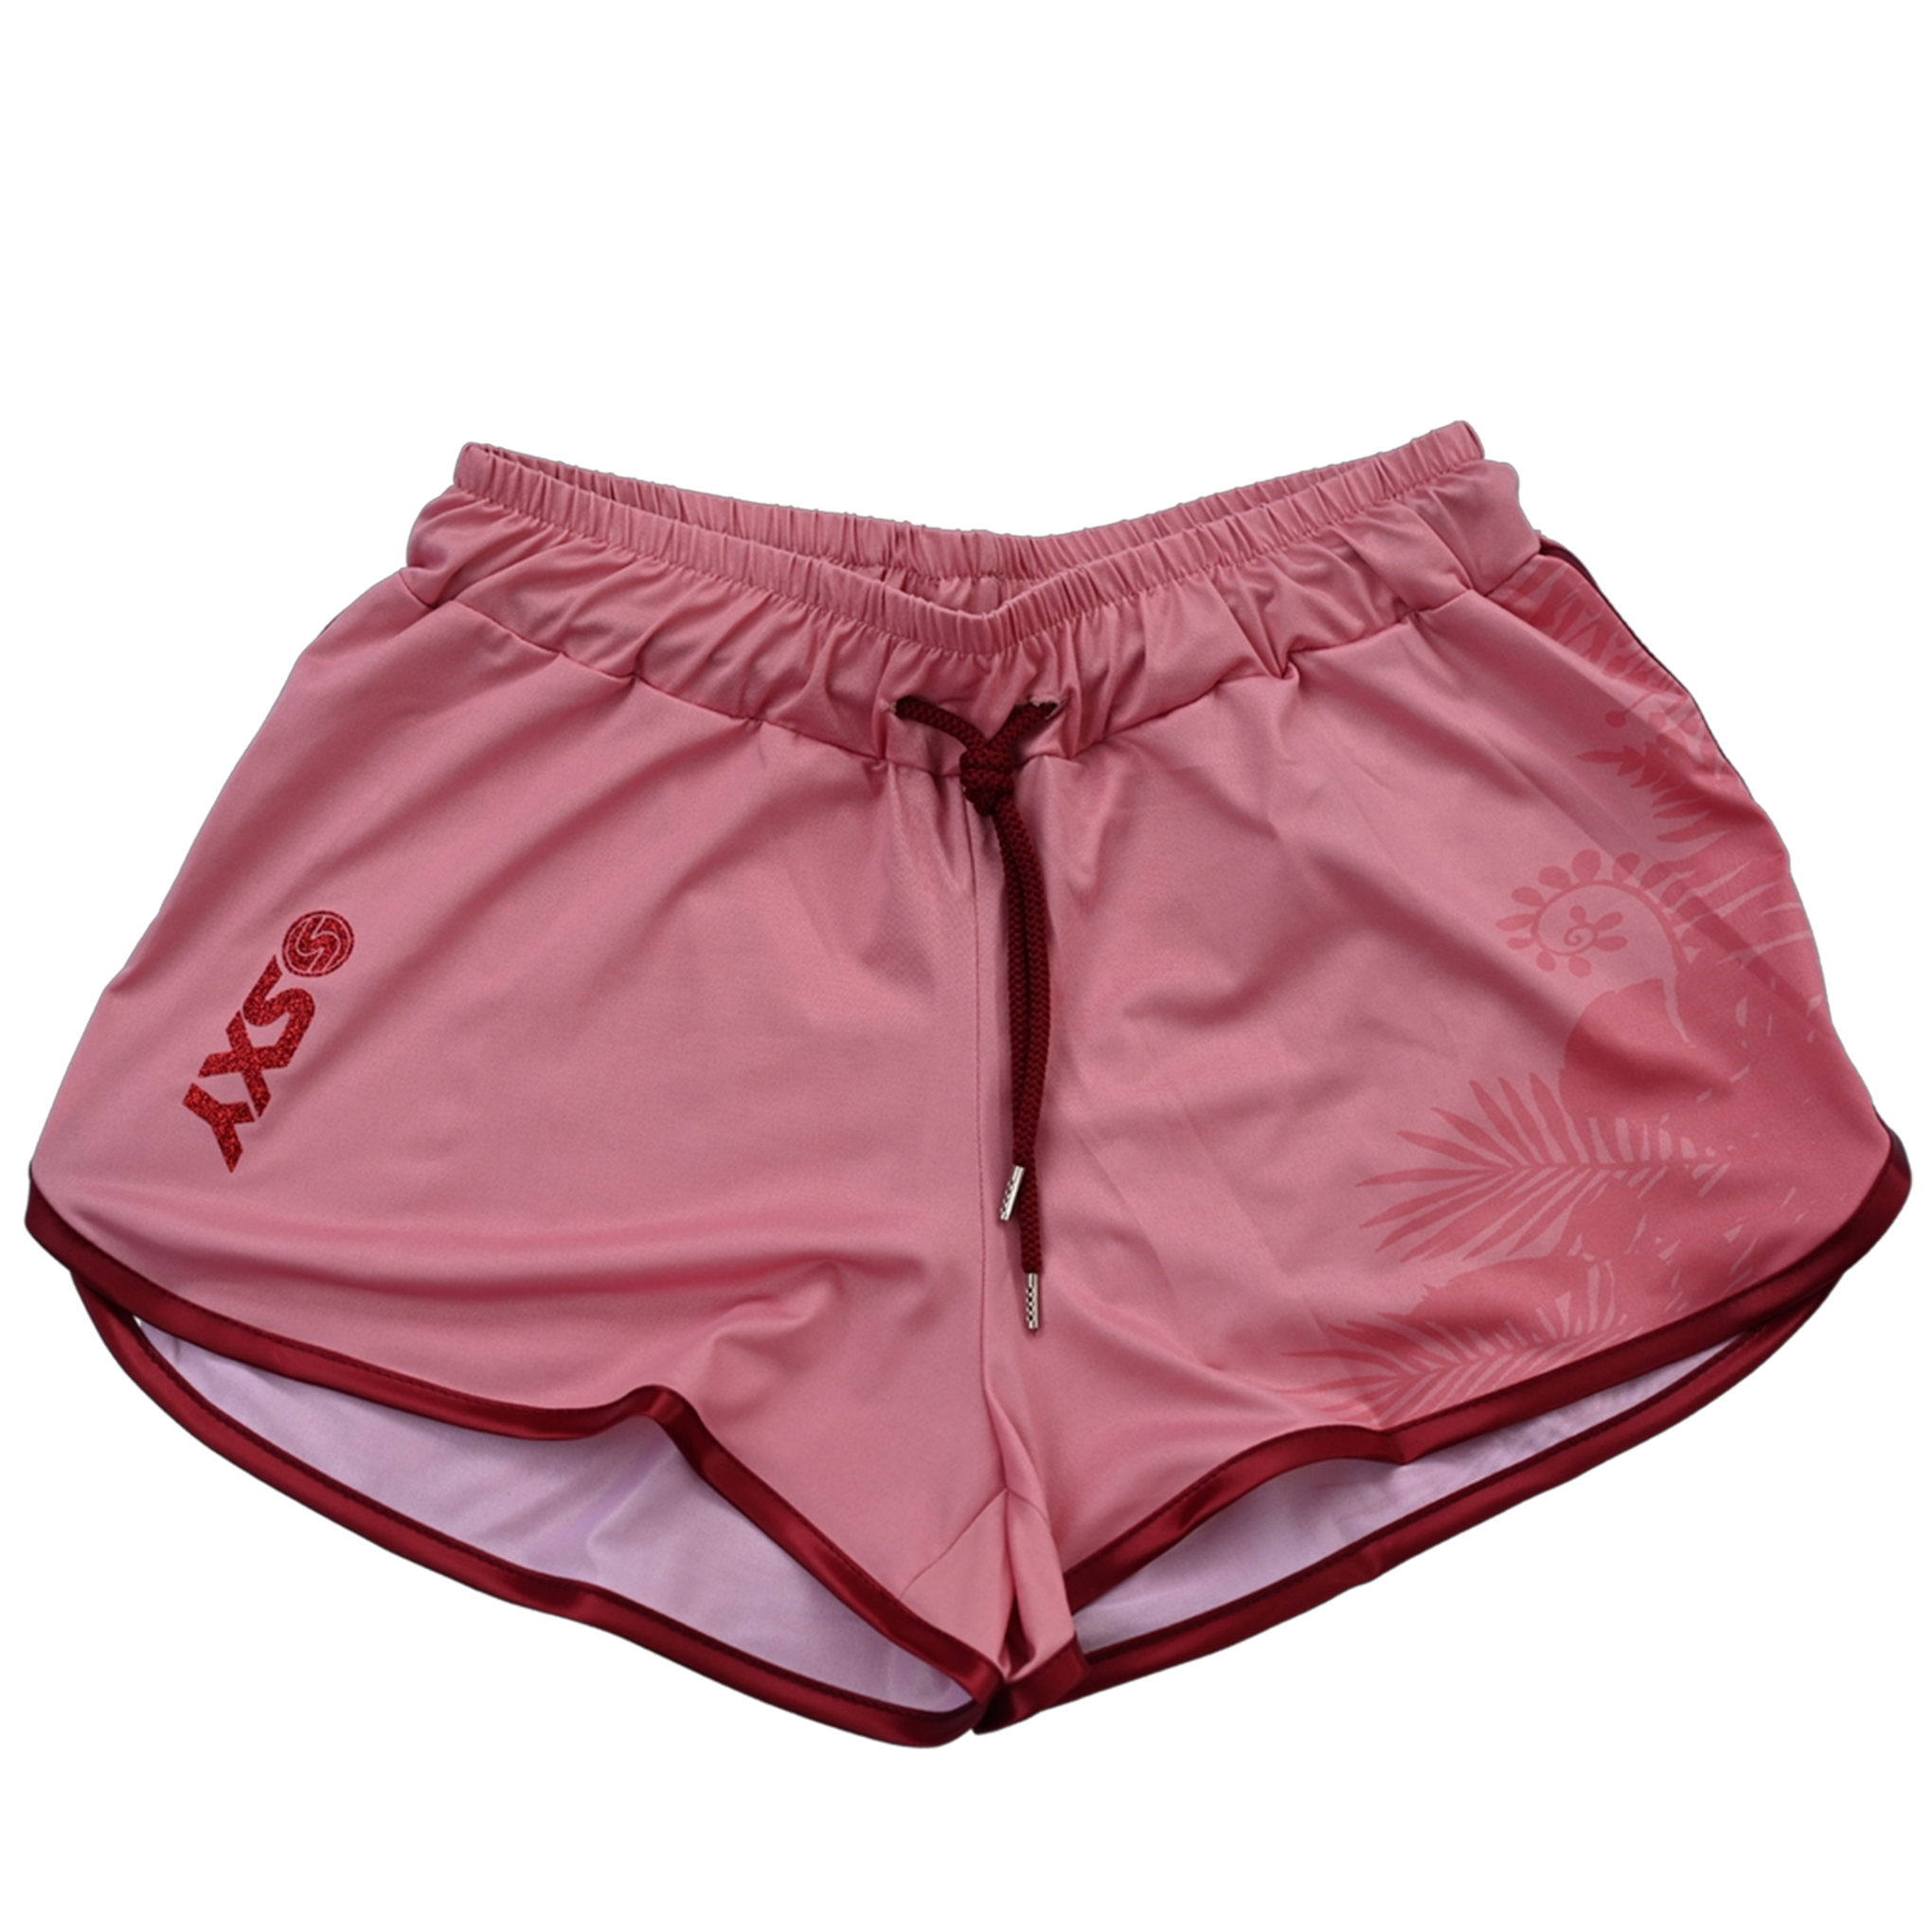 SEXY BRAND Women's SXY NKD Competition Short in Red Wine